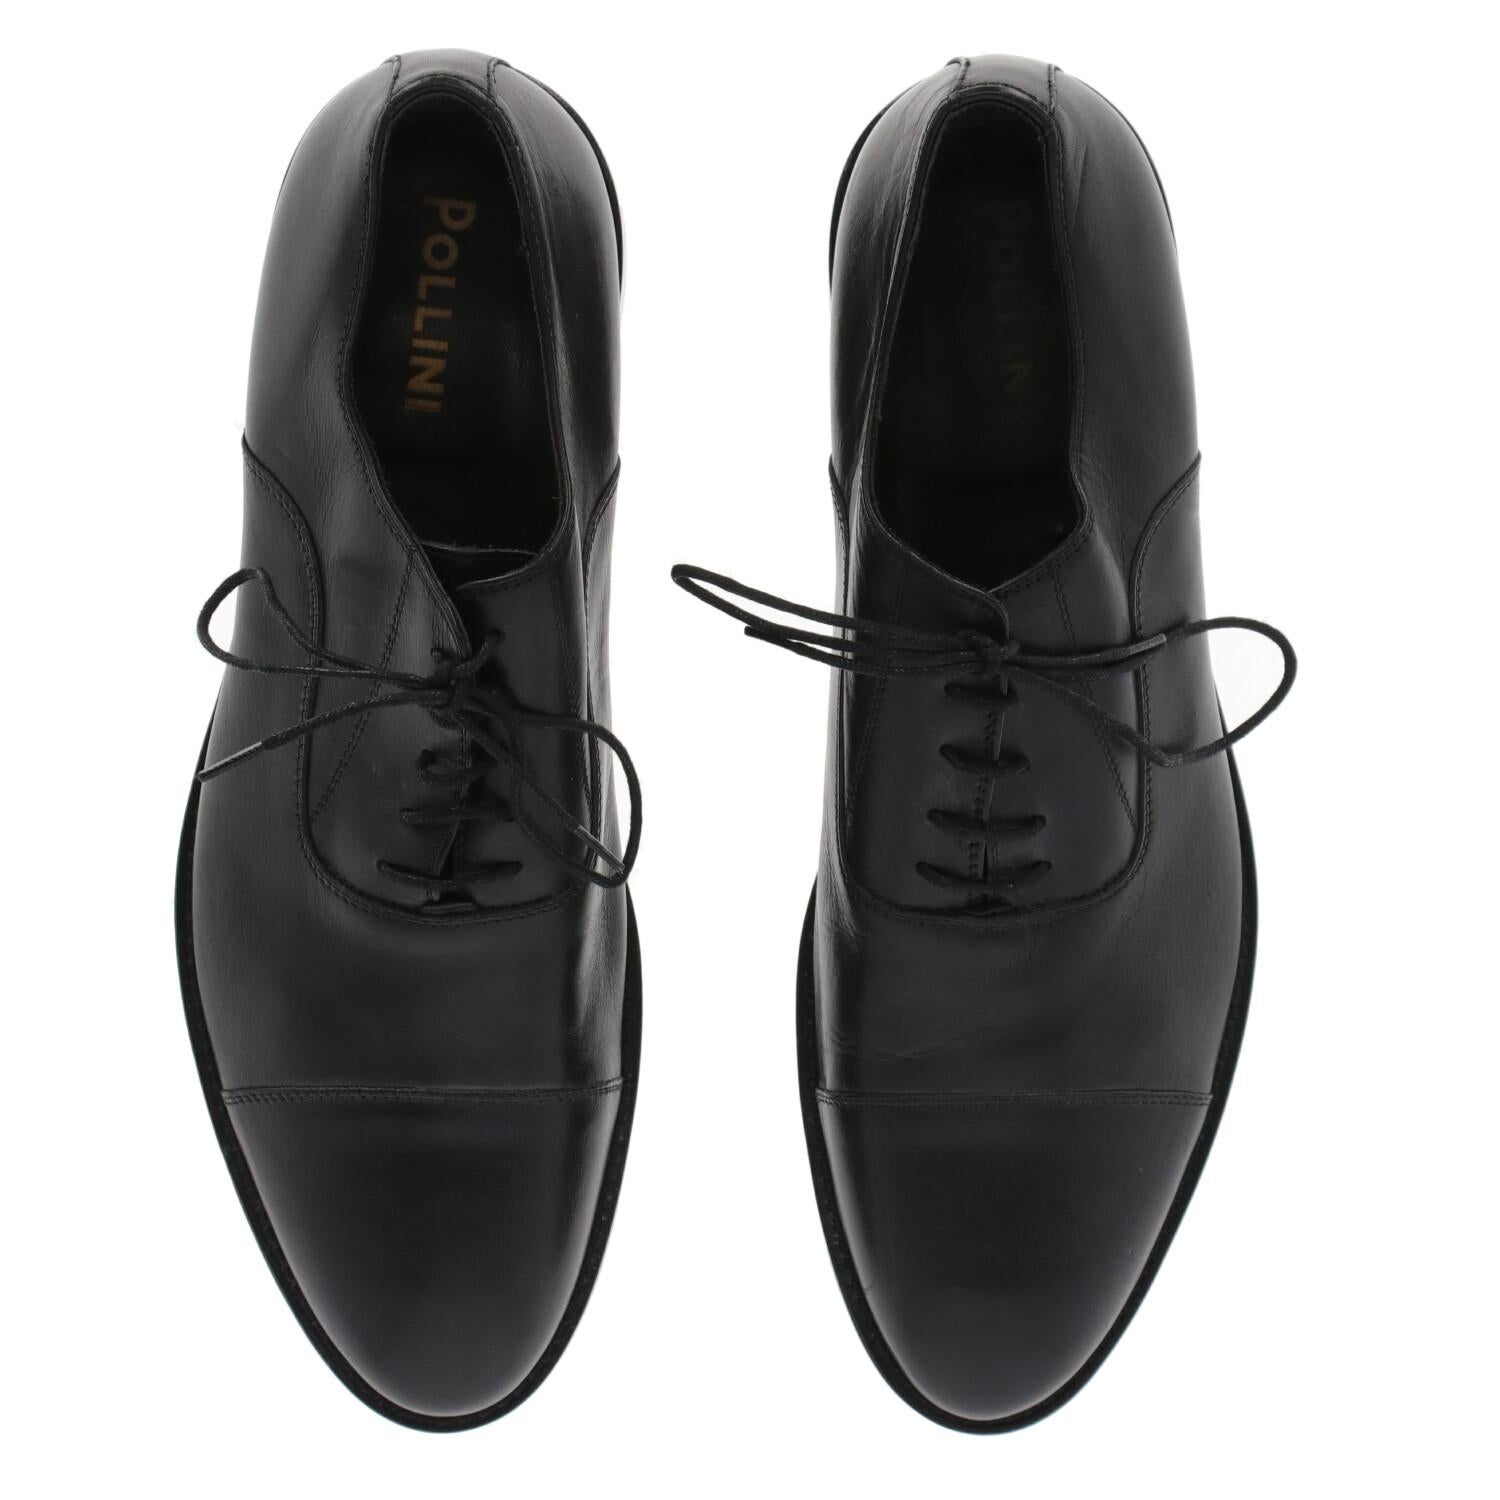 2000s Pollini Black Leather Oxford Shoes In Good Condition For Sale In Lugo (RA), IT